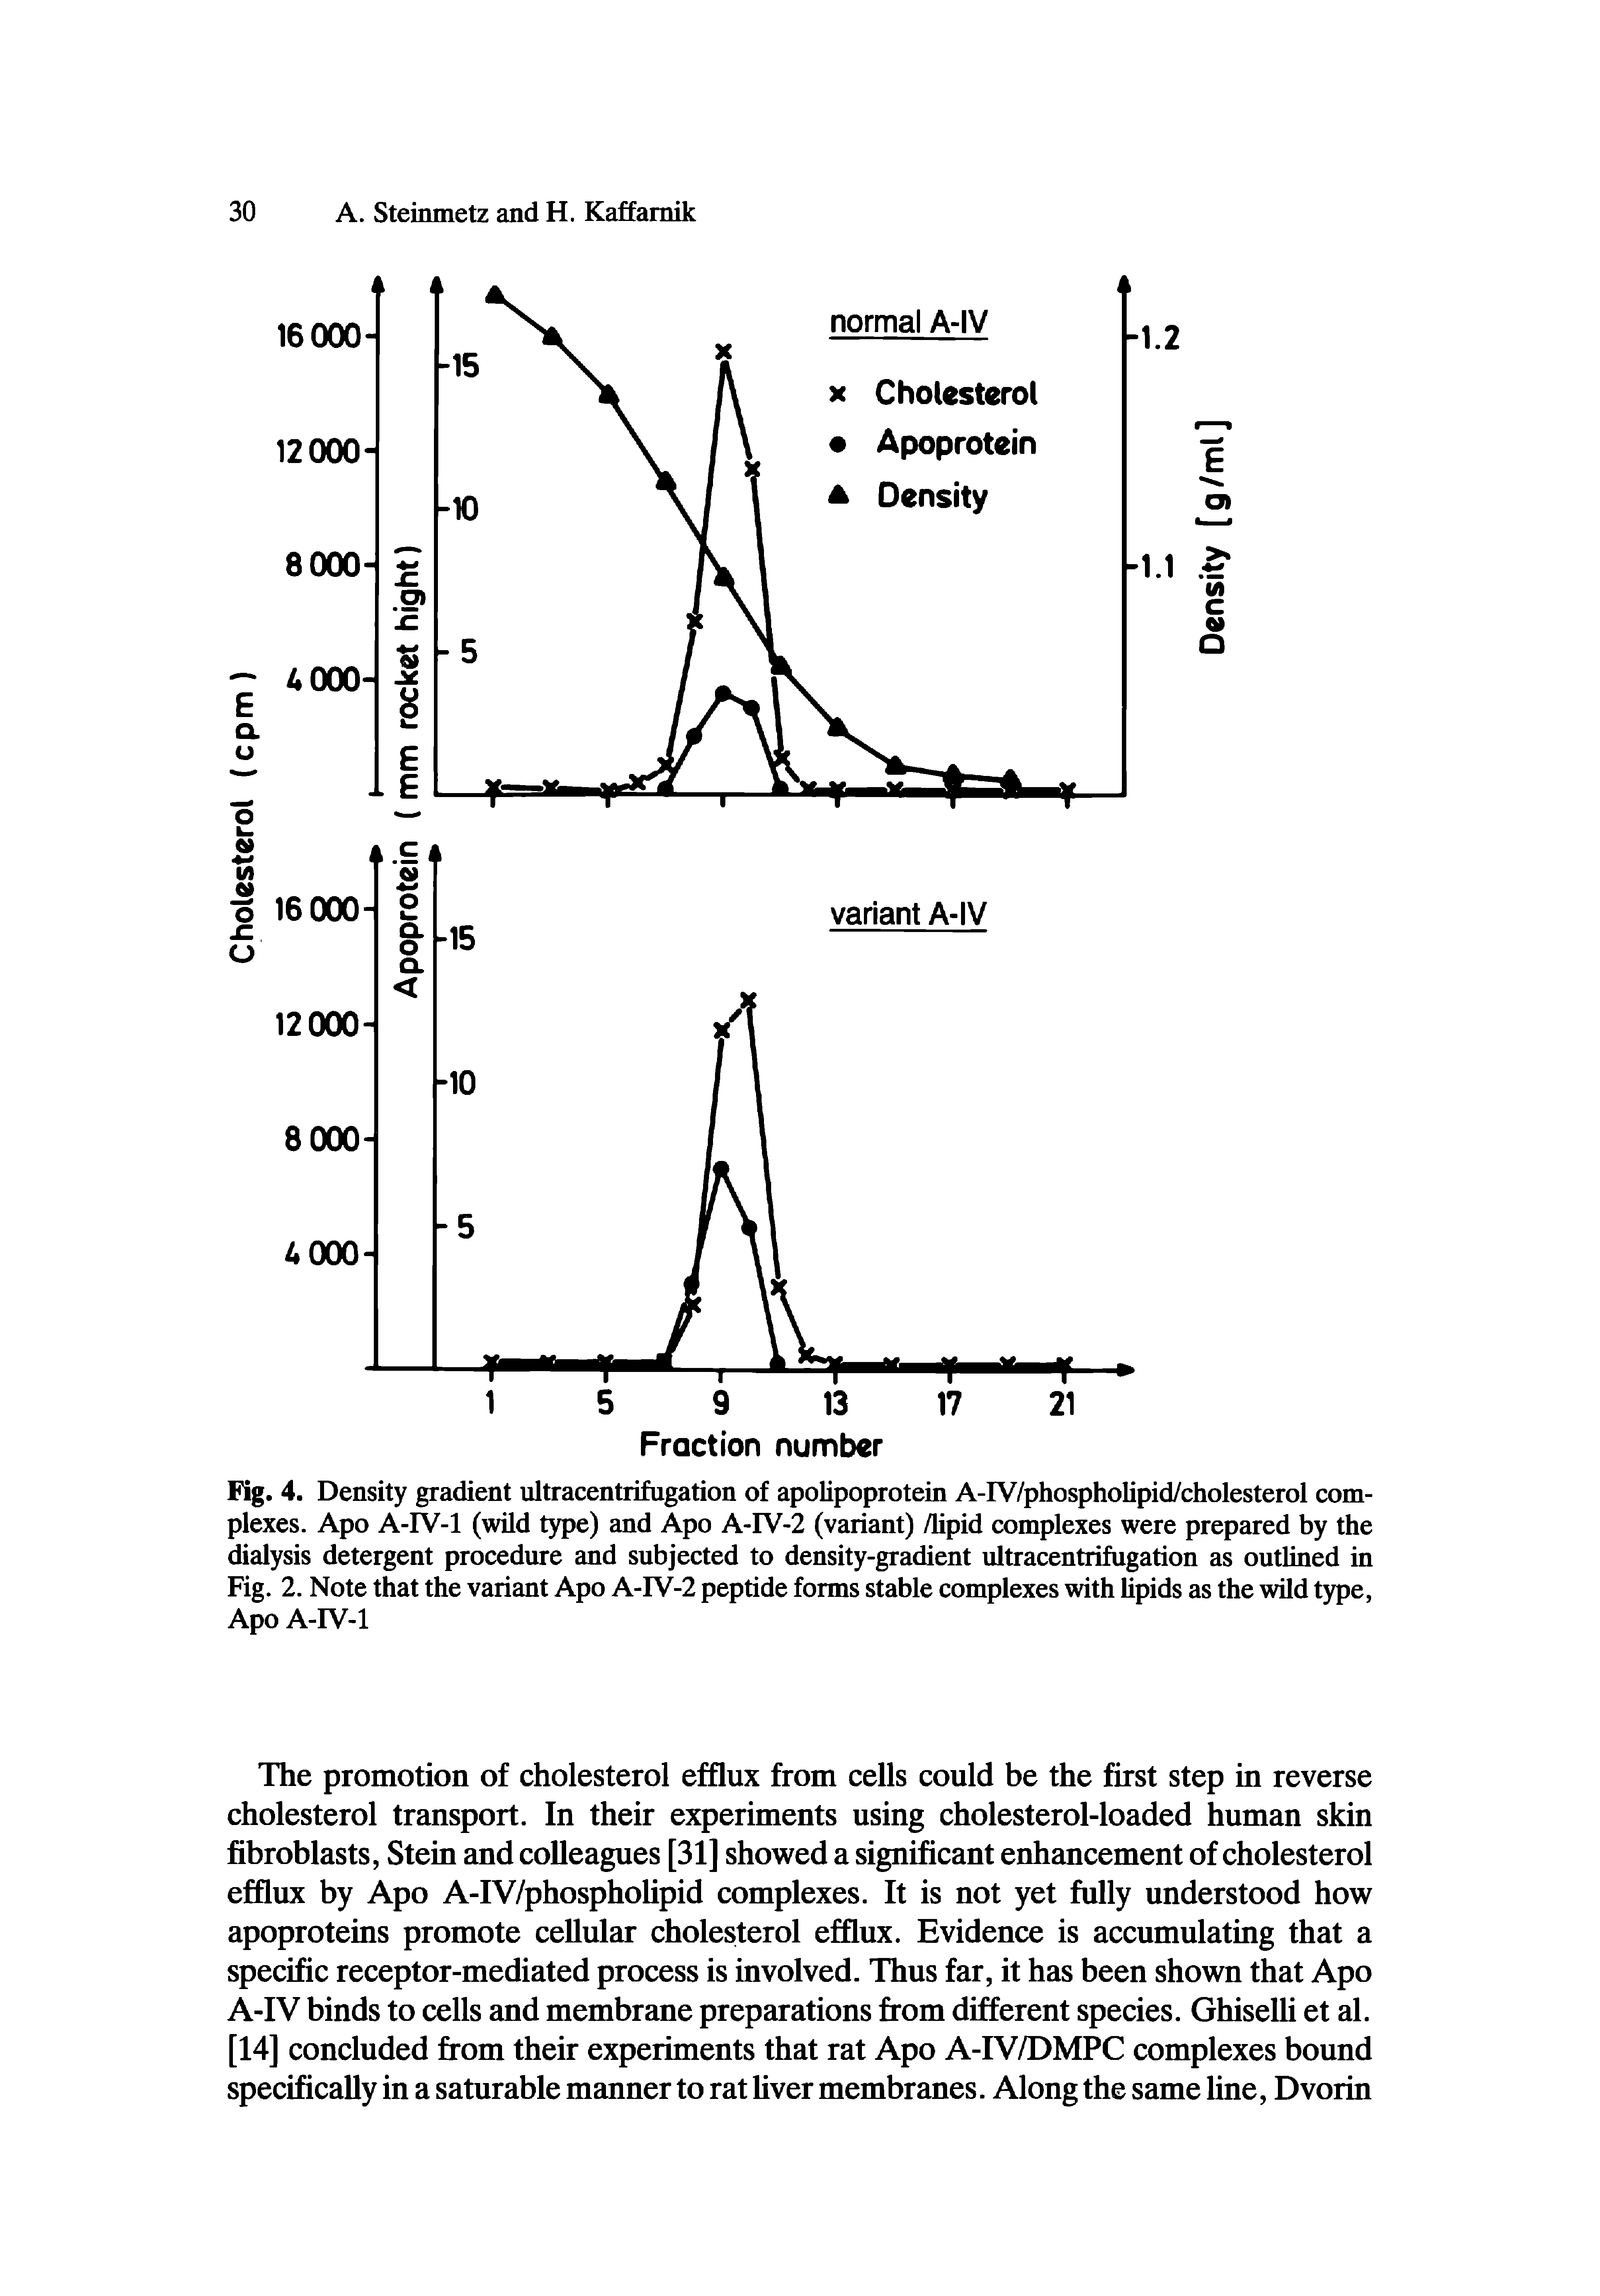 Fig. 4. Density gradient ultracentrifugation of apolipoprotein A-IV/phospholipid/cholesterol complexes. Apo A-IV-1 (wild type) and Apo A-IV-2 (variant) /lipid complexes were prepared by the dialysis detergent procedure and subjected to density-gradient ultracentrifugation as outlined in Fig. 2. Note that the variant Apo A-IV-2 peptide forms stable complexes with lipids as the wild type, Apo A-IV-1...